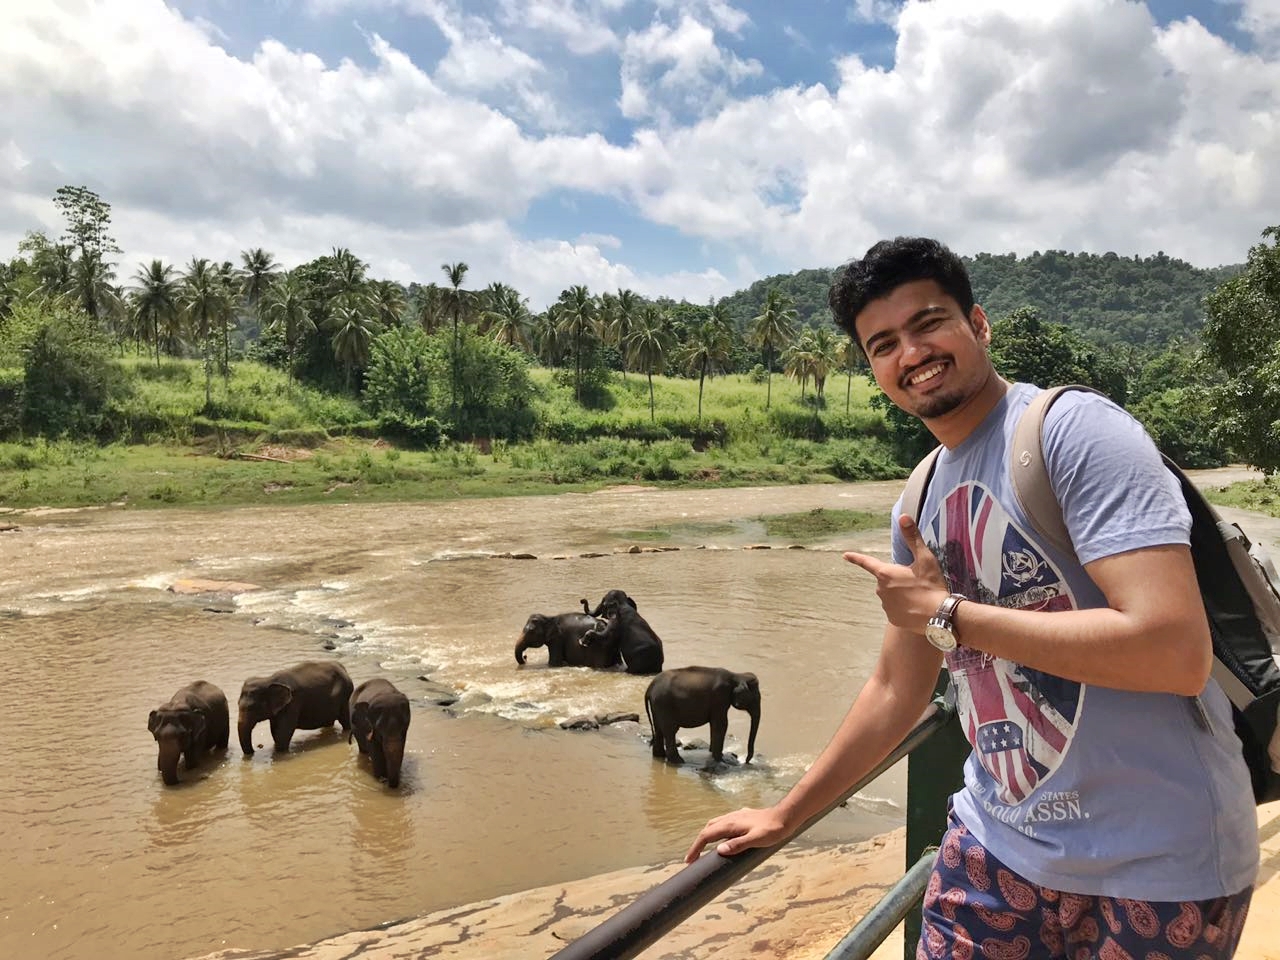 Me invading the privacy of the elephants while they were bathing